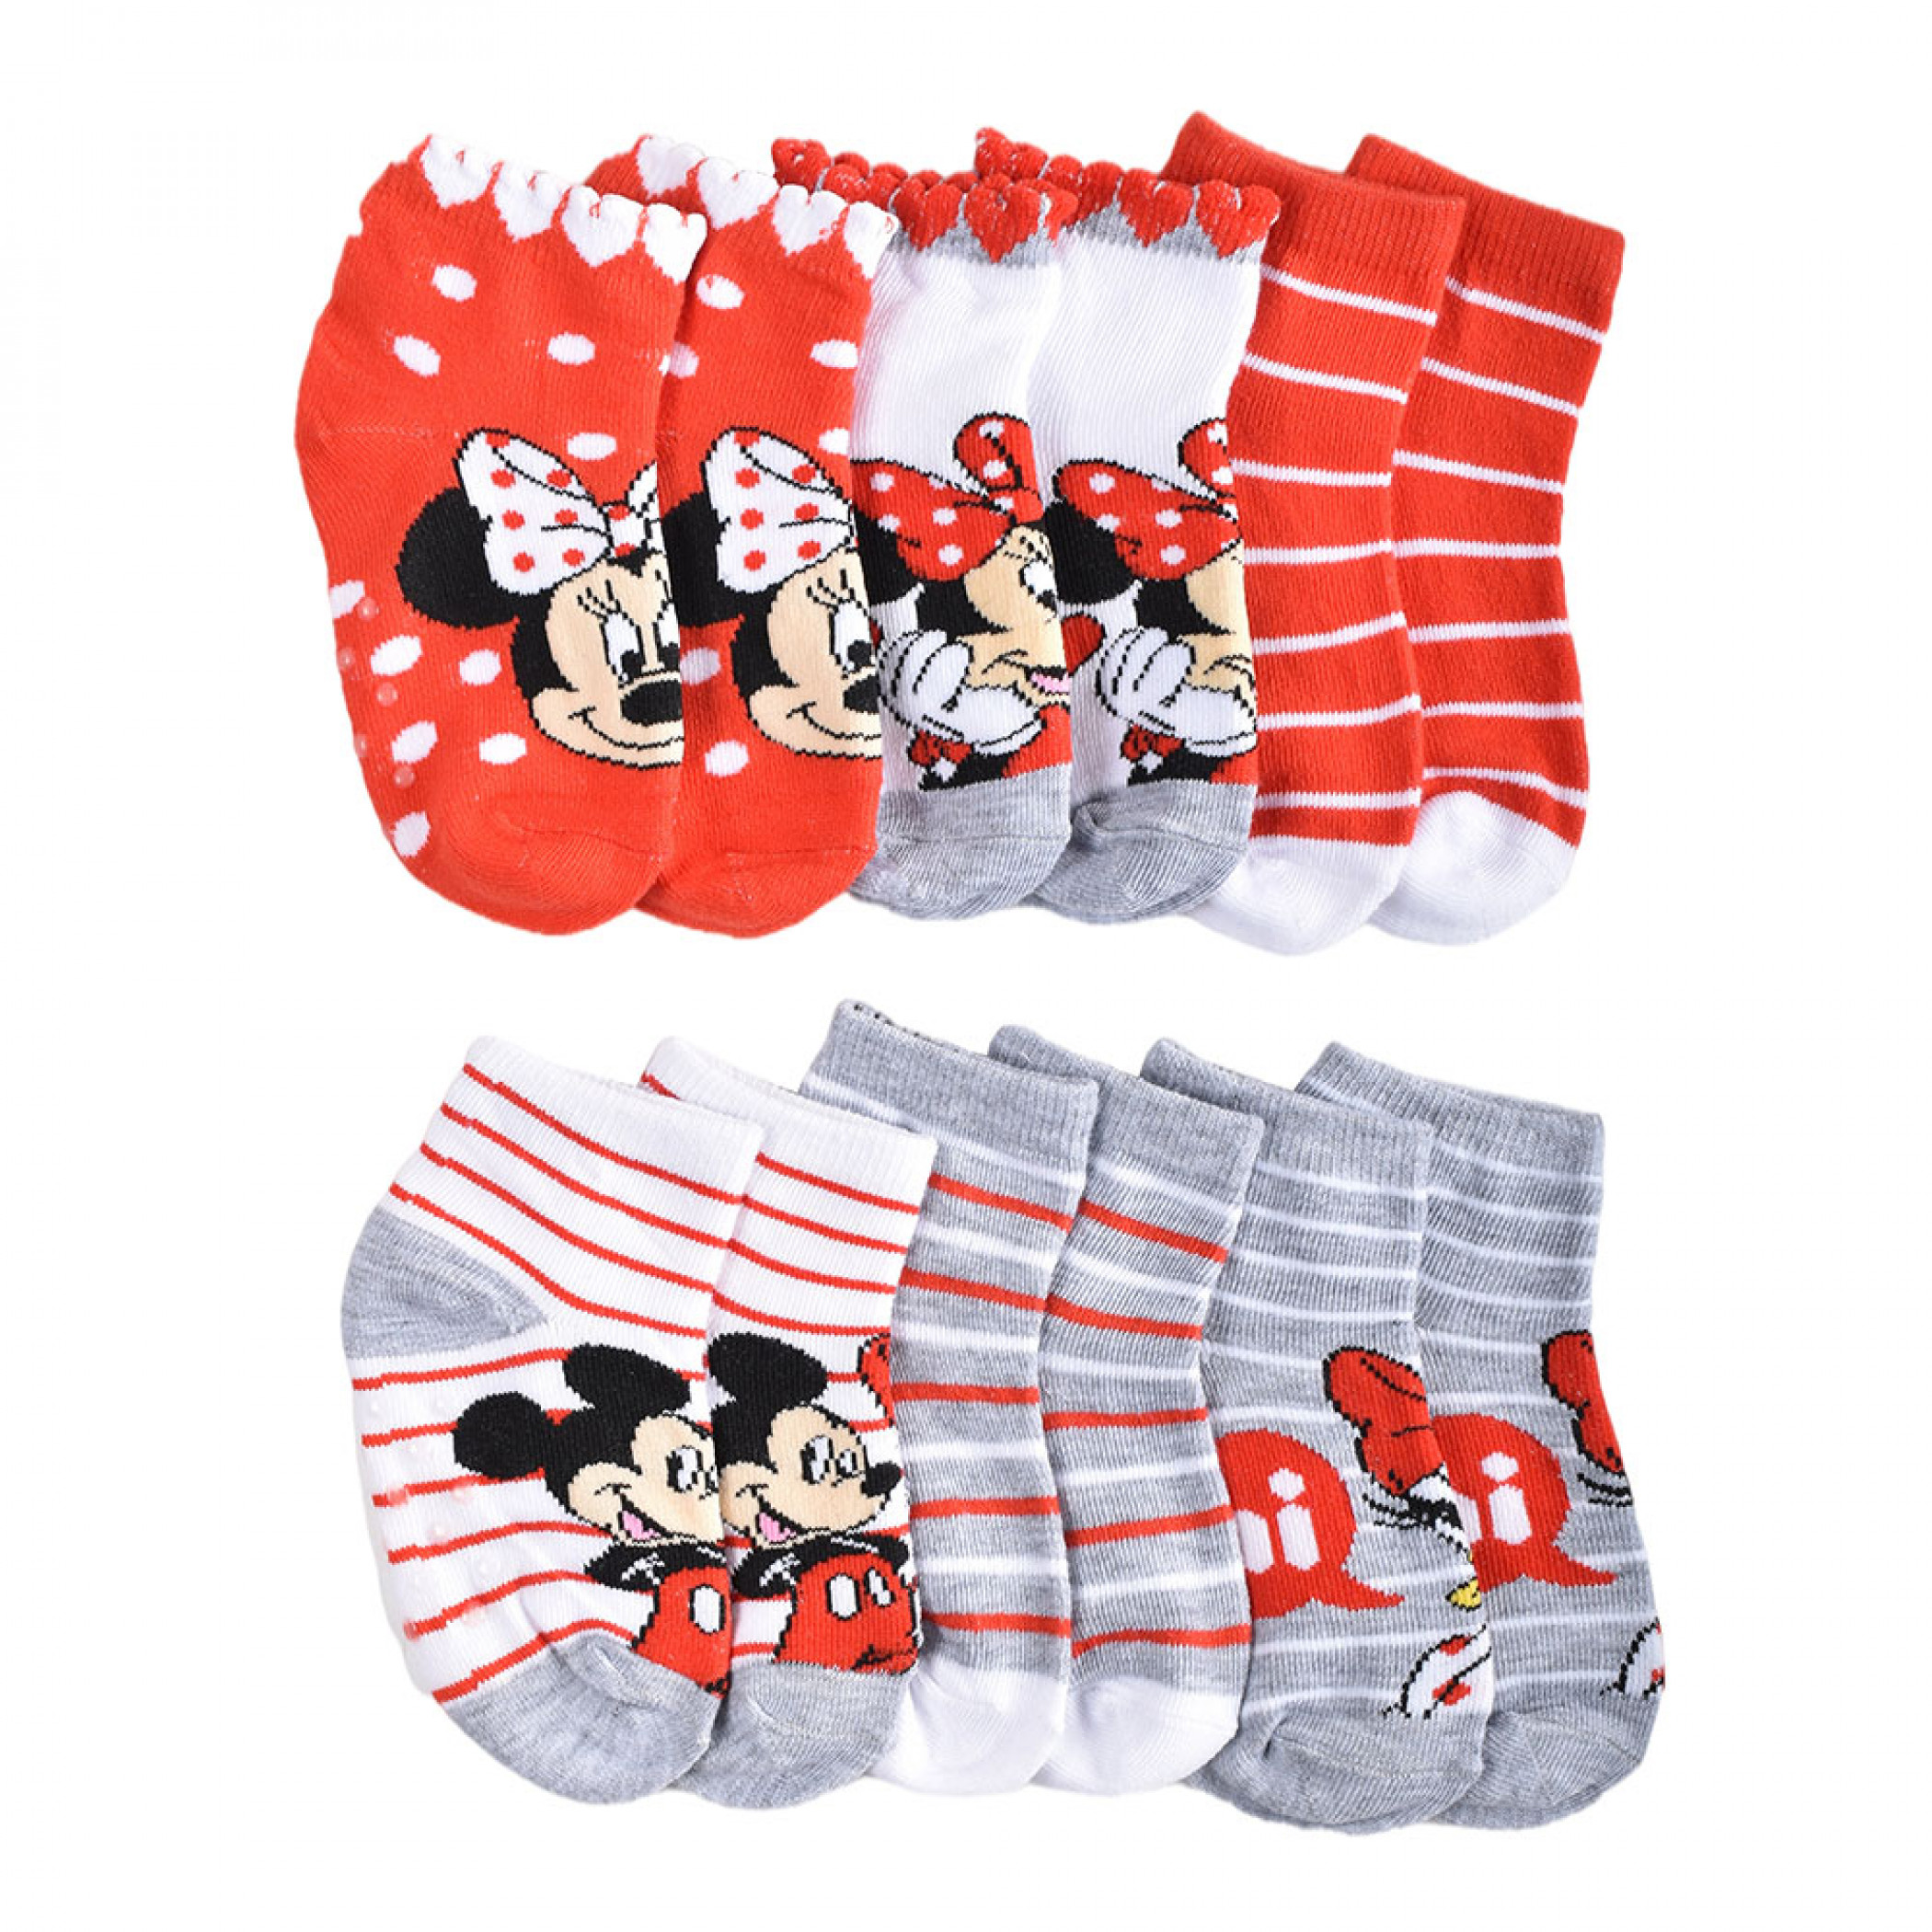 Disney Minnie Mouse and Daisy Duck Baby Girl Crew Socks 6-Pack